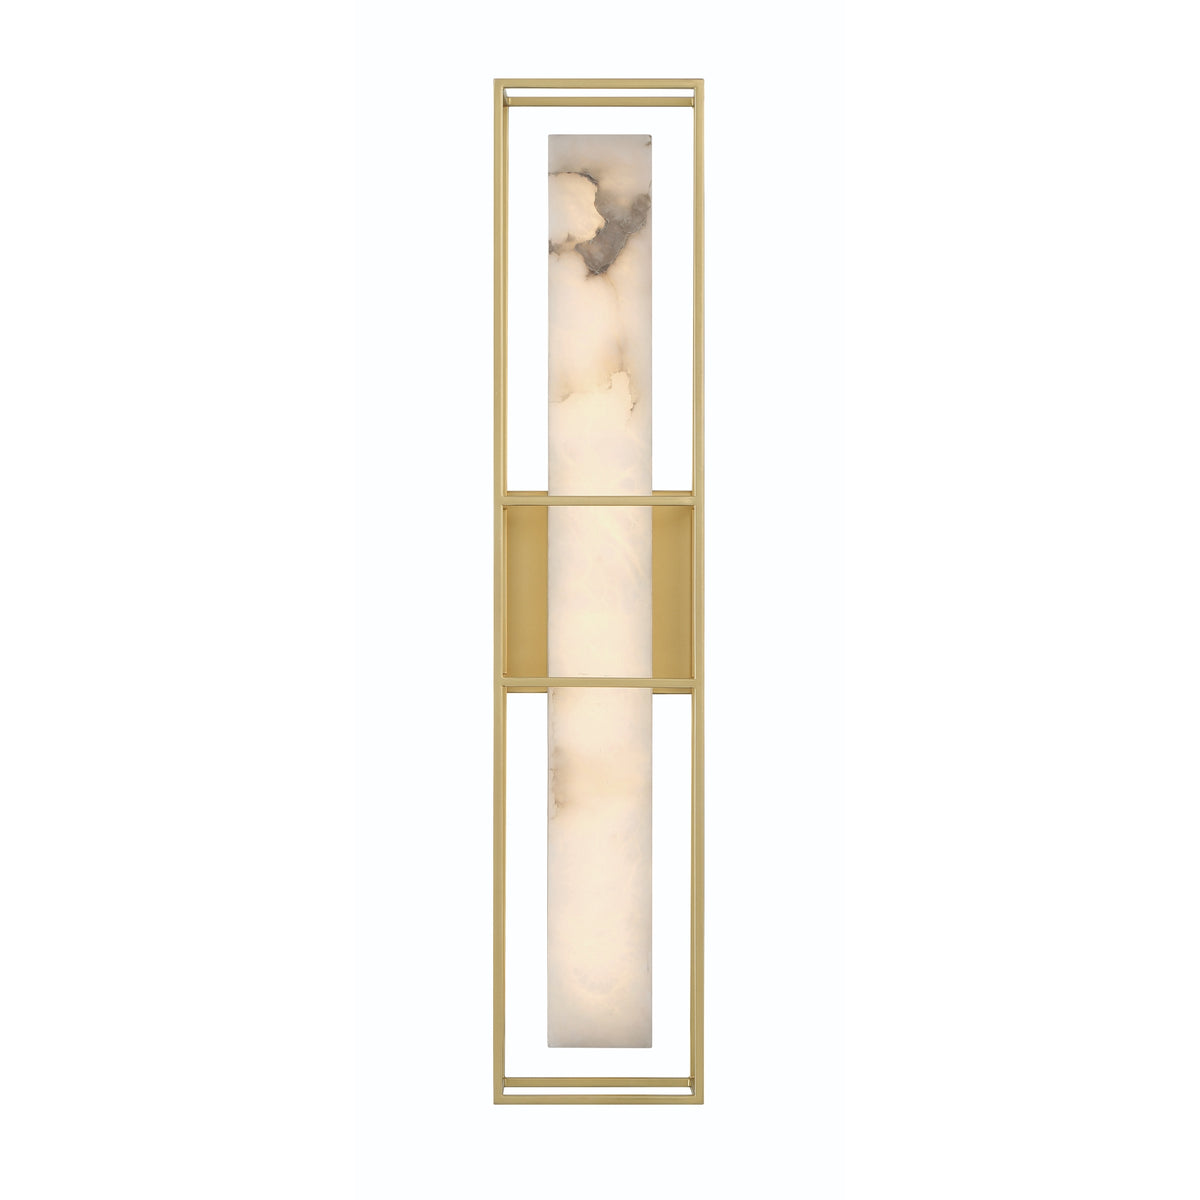 Eurofase Canada - 46838-025 - LED Outdoor Wall Sconce - Blakley - Gold